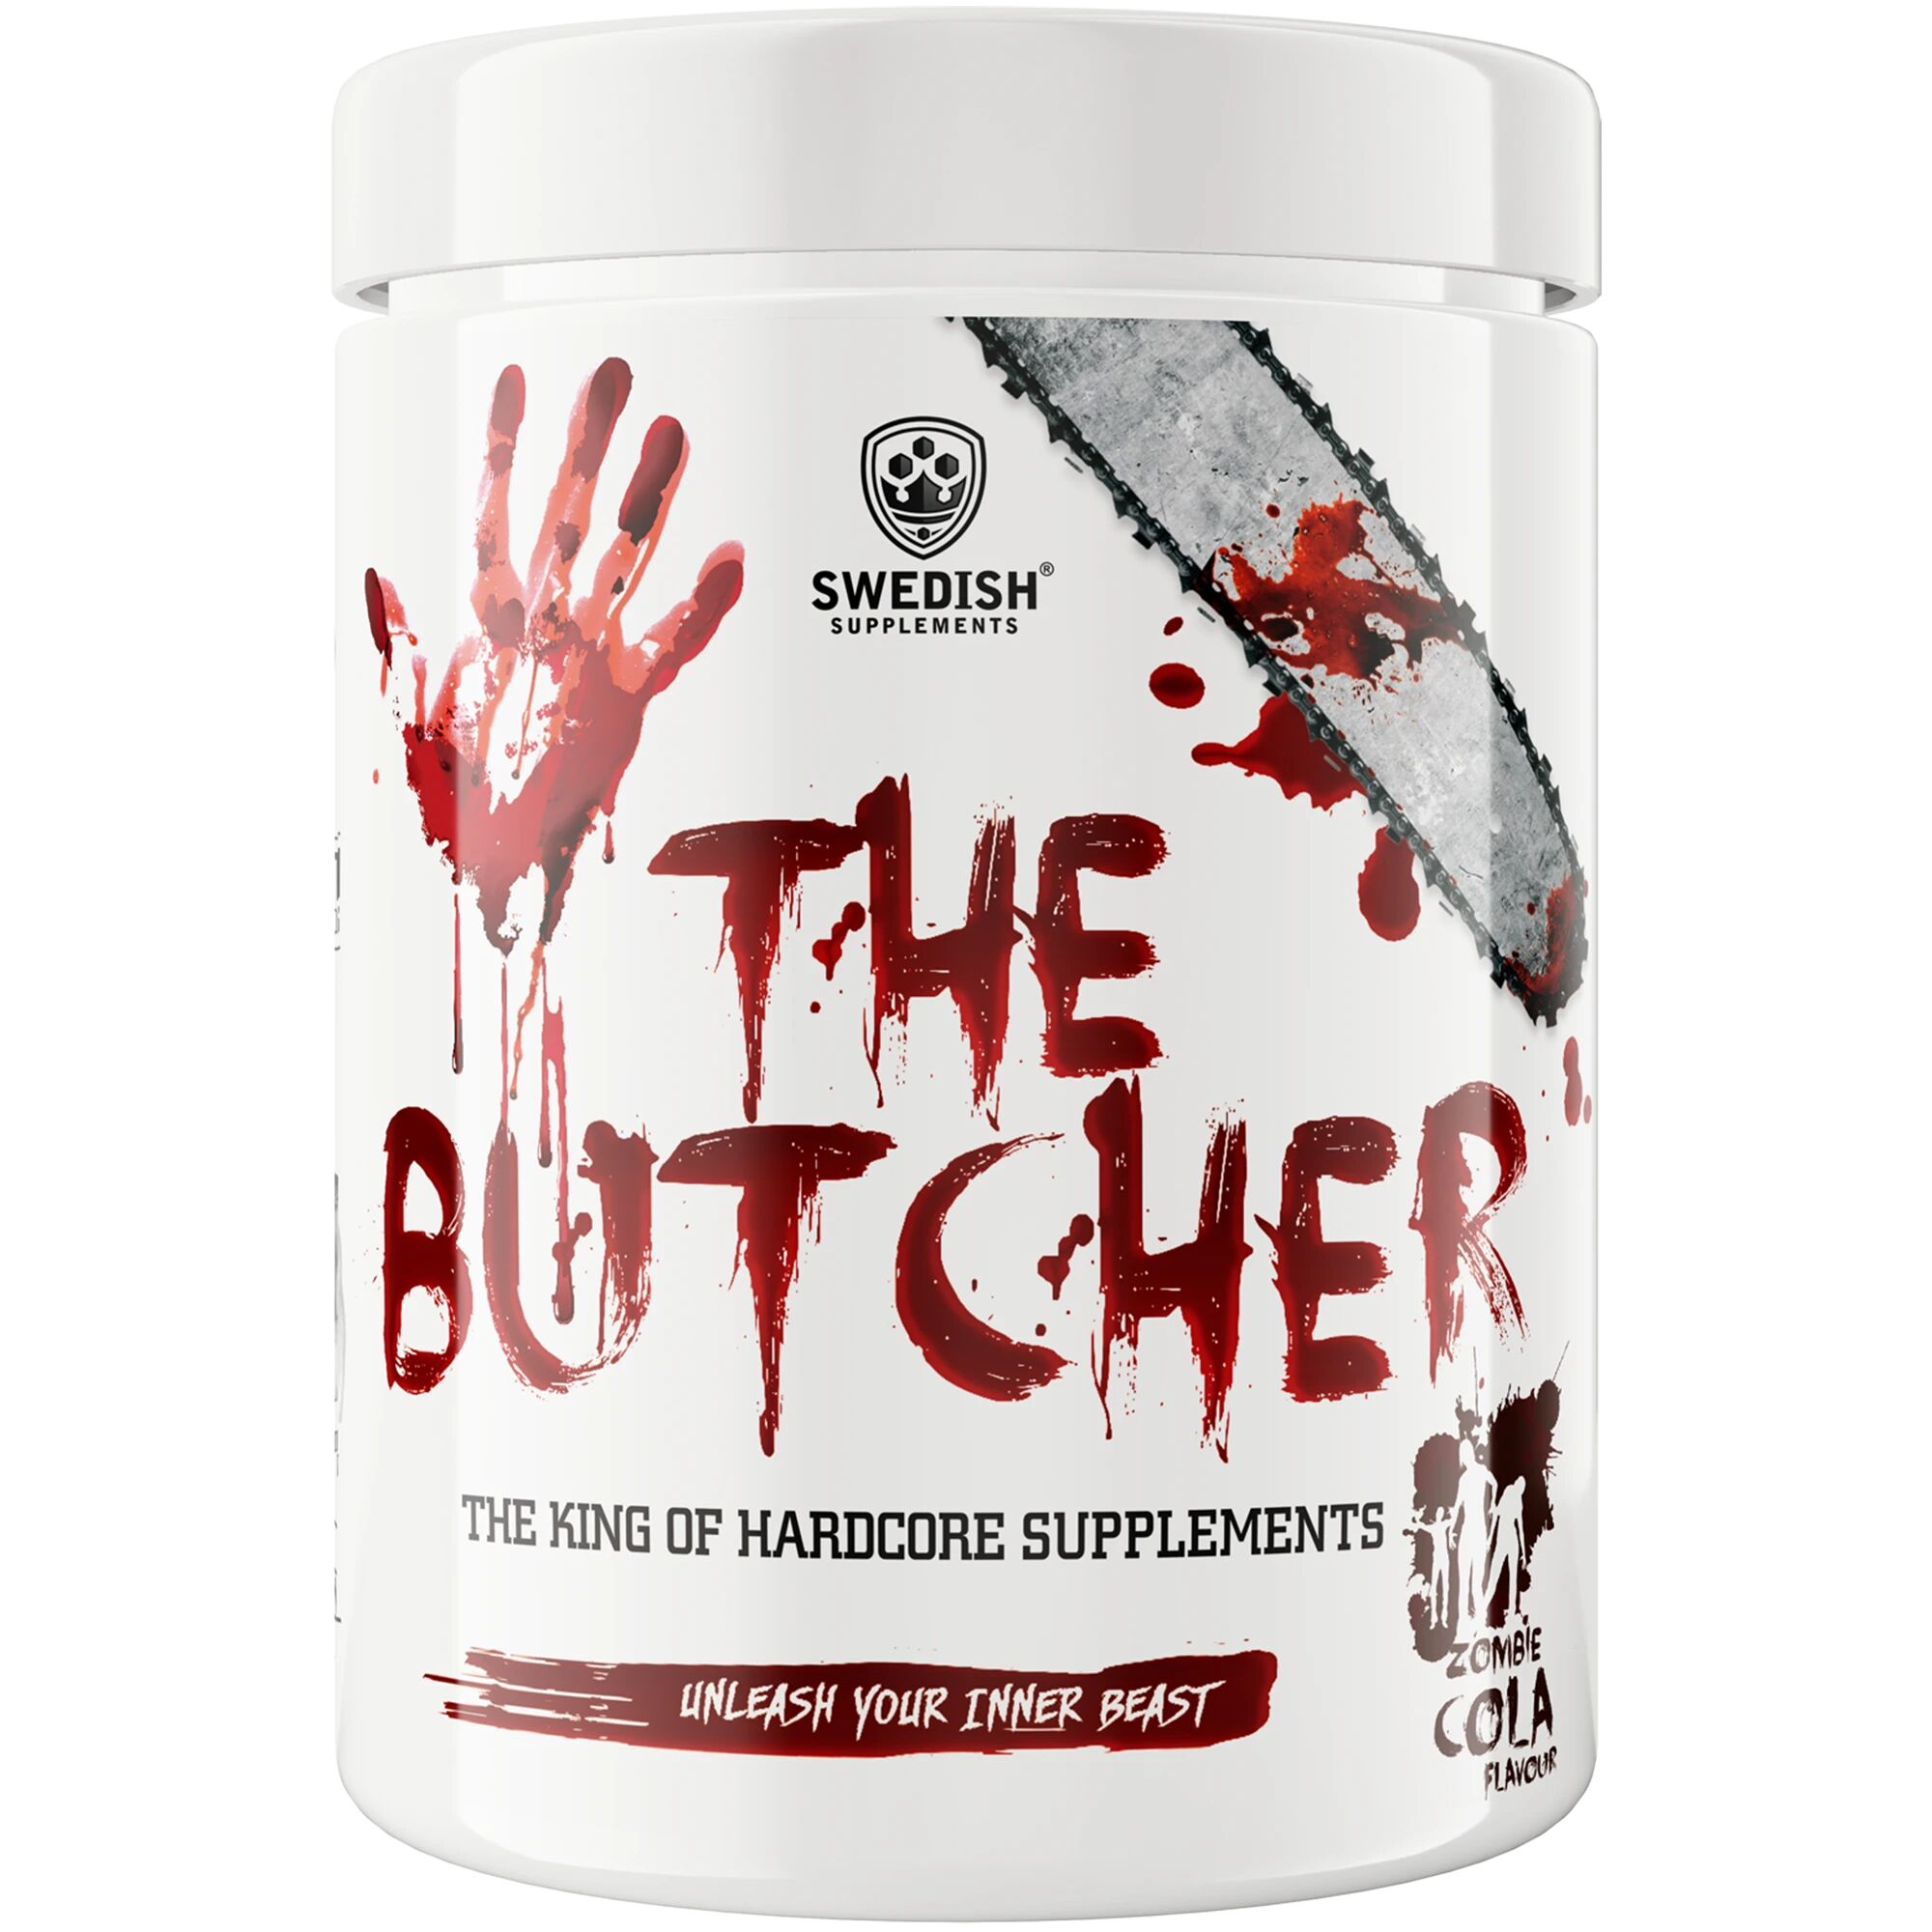 Swedish Supplements The Butcher 525 g, preworkout 525g Zombie Cola